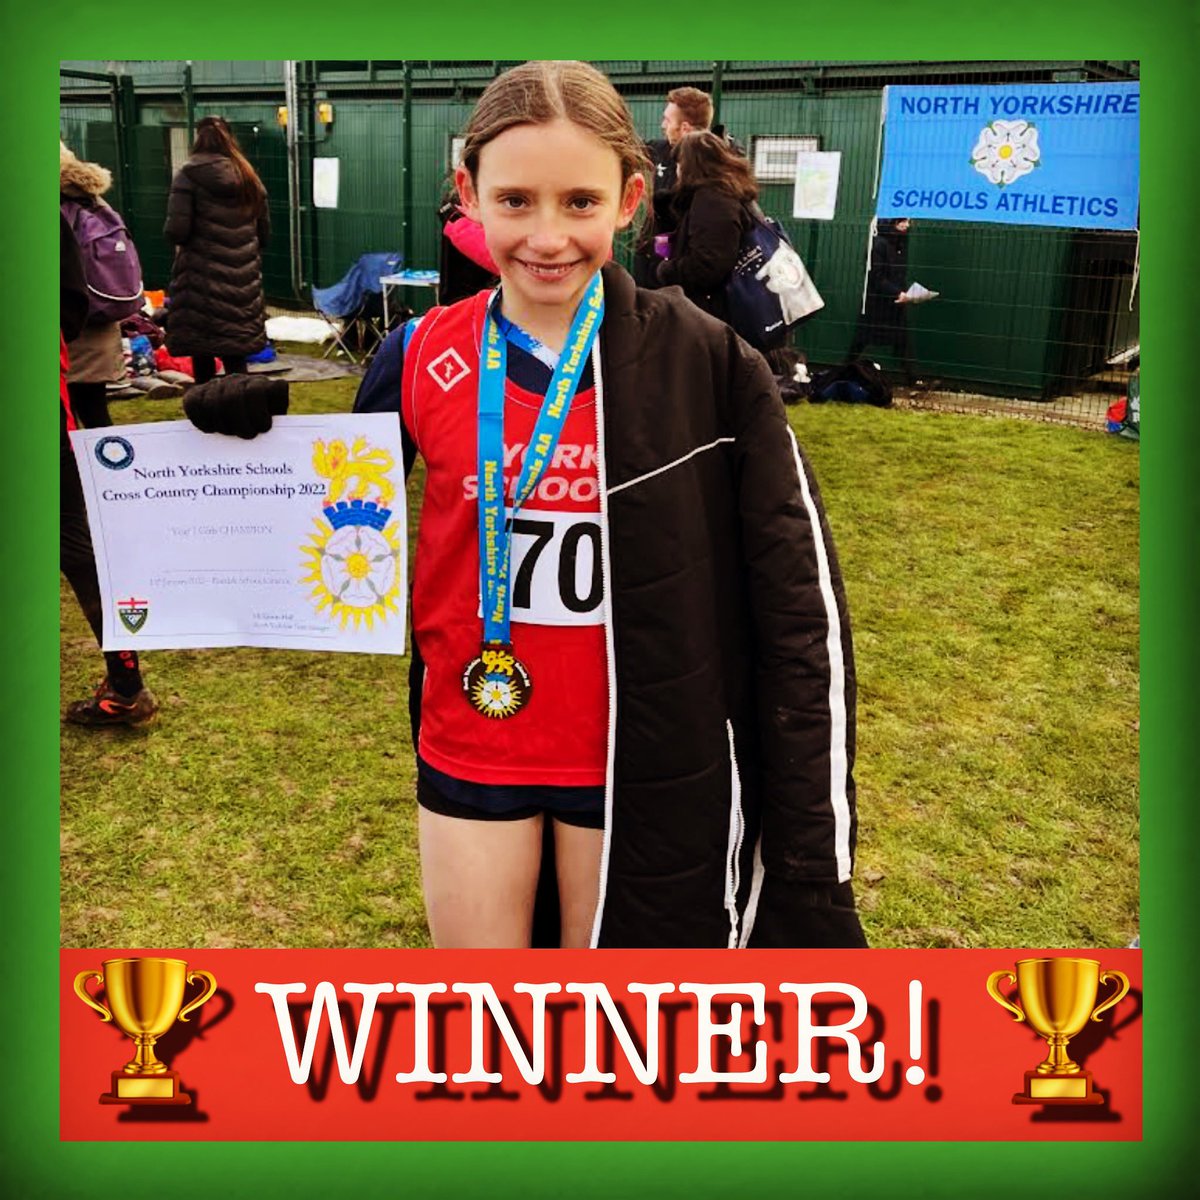 Meep Meep! Aimee is Read’s very own Roadrunner! Winner of North Yorks Schools’ Cross-Country Championships, A took the Yr7 group by storm. On a freezing day, A lead from 600m, to win, & competes in the next round + the National Champs. So proud! #running #champion #watchthisspace